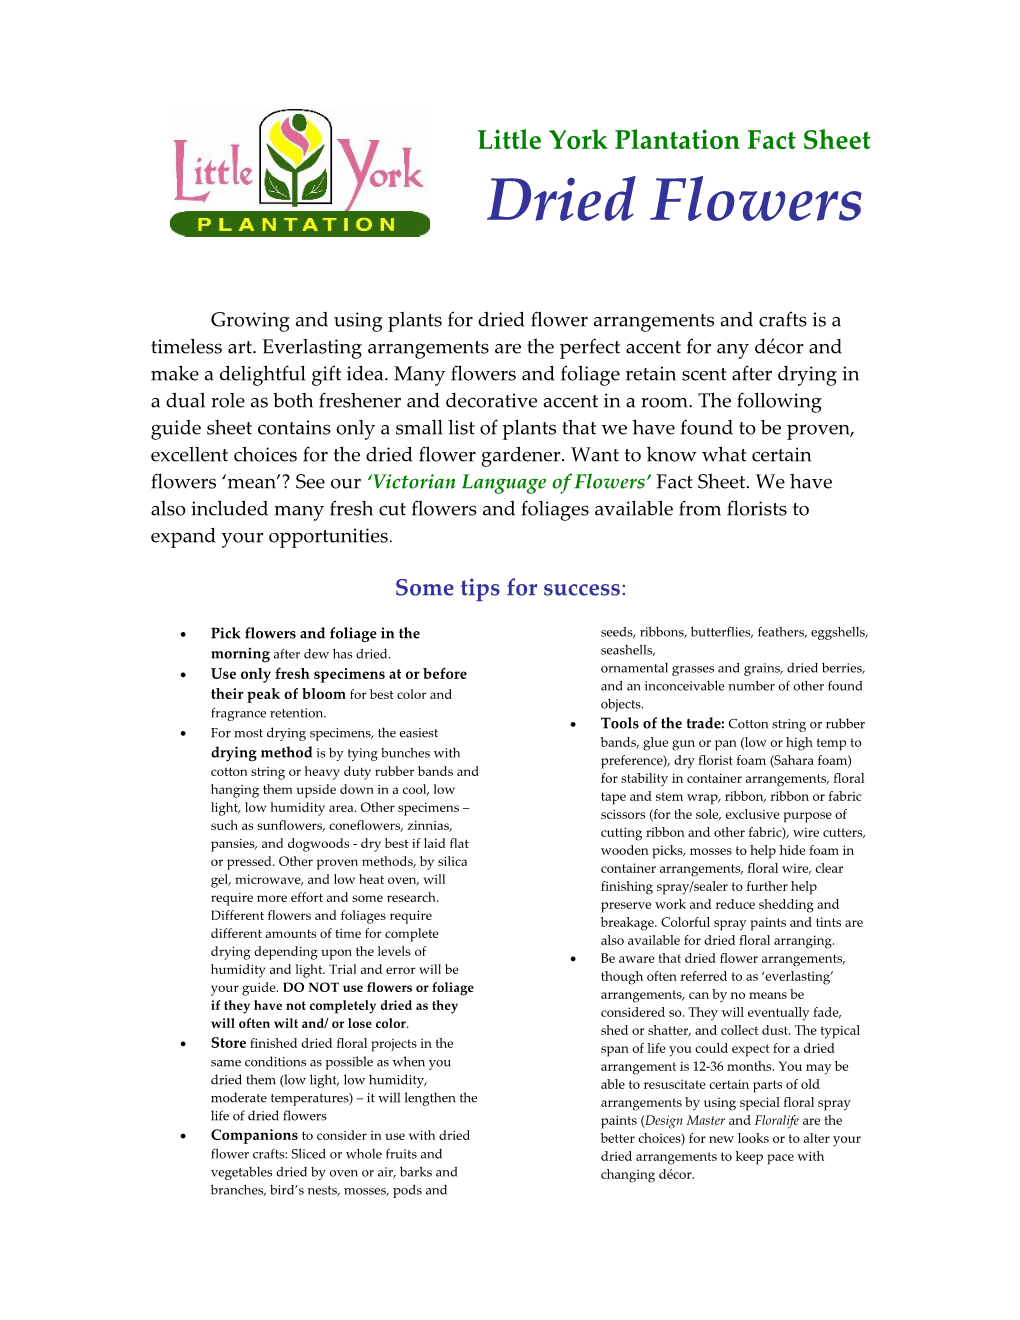 Plant Suggestions for Dried Flower